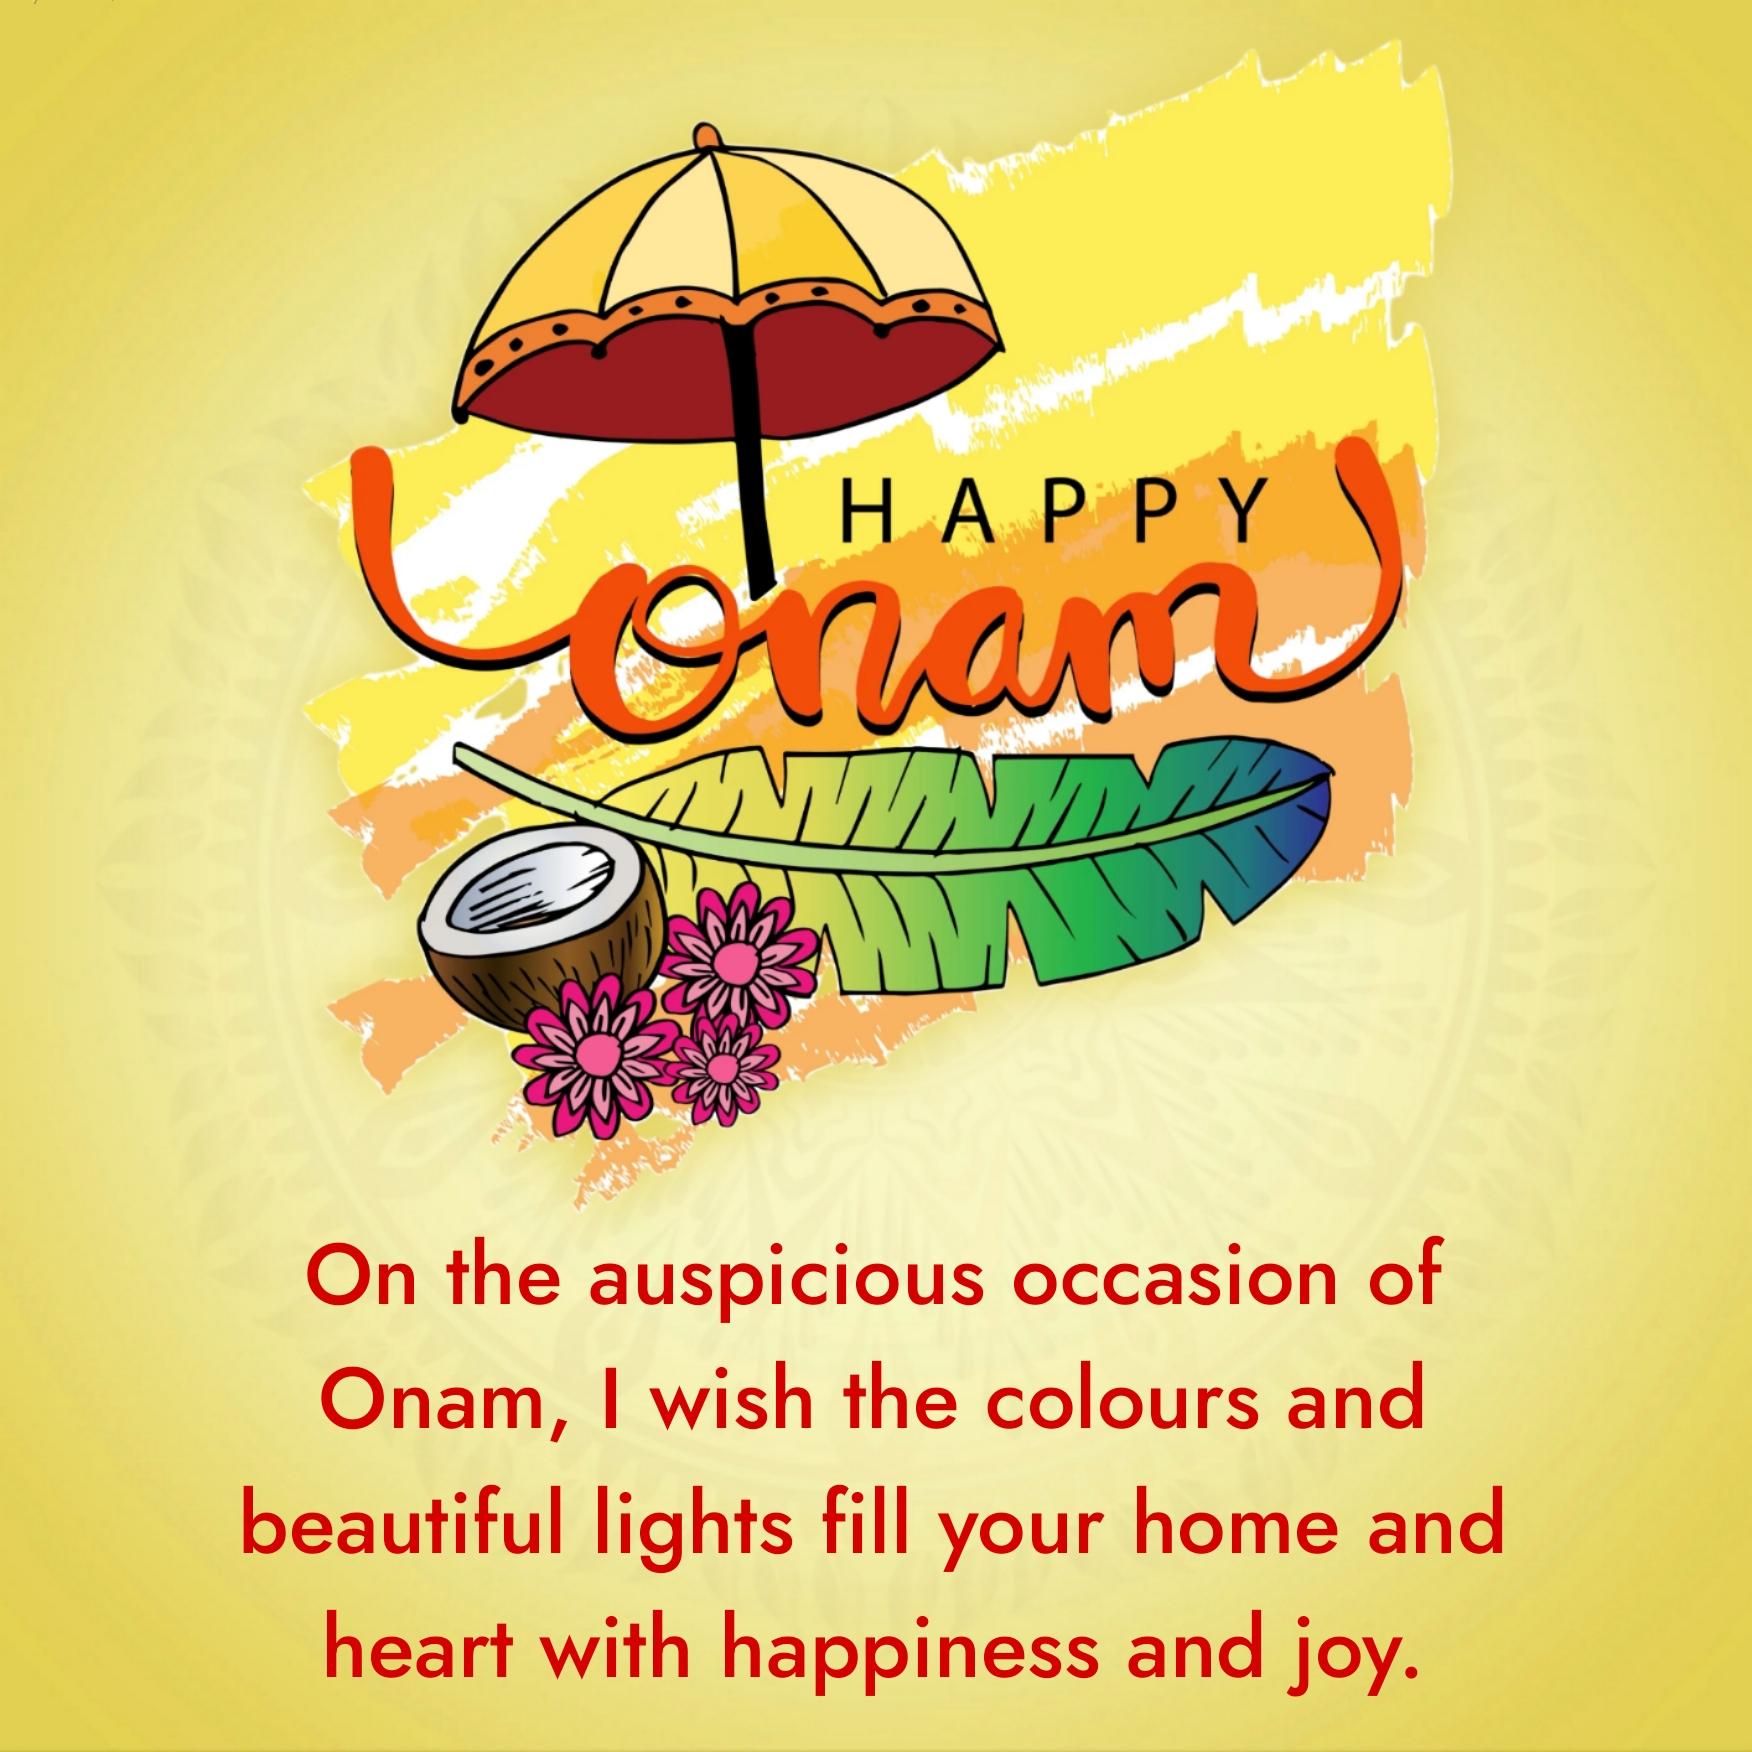 On the auspicious occasion of Onam I wish the colours and beautiful lights